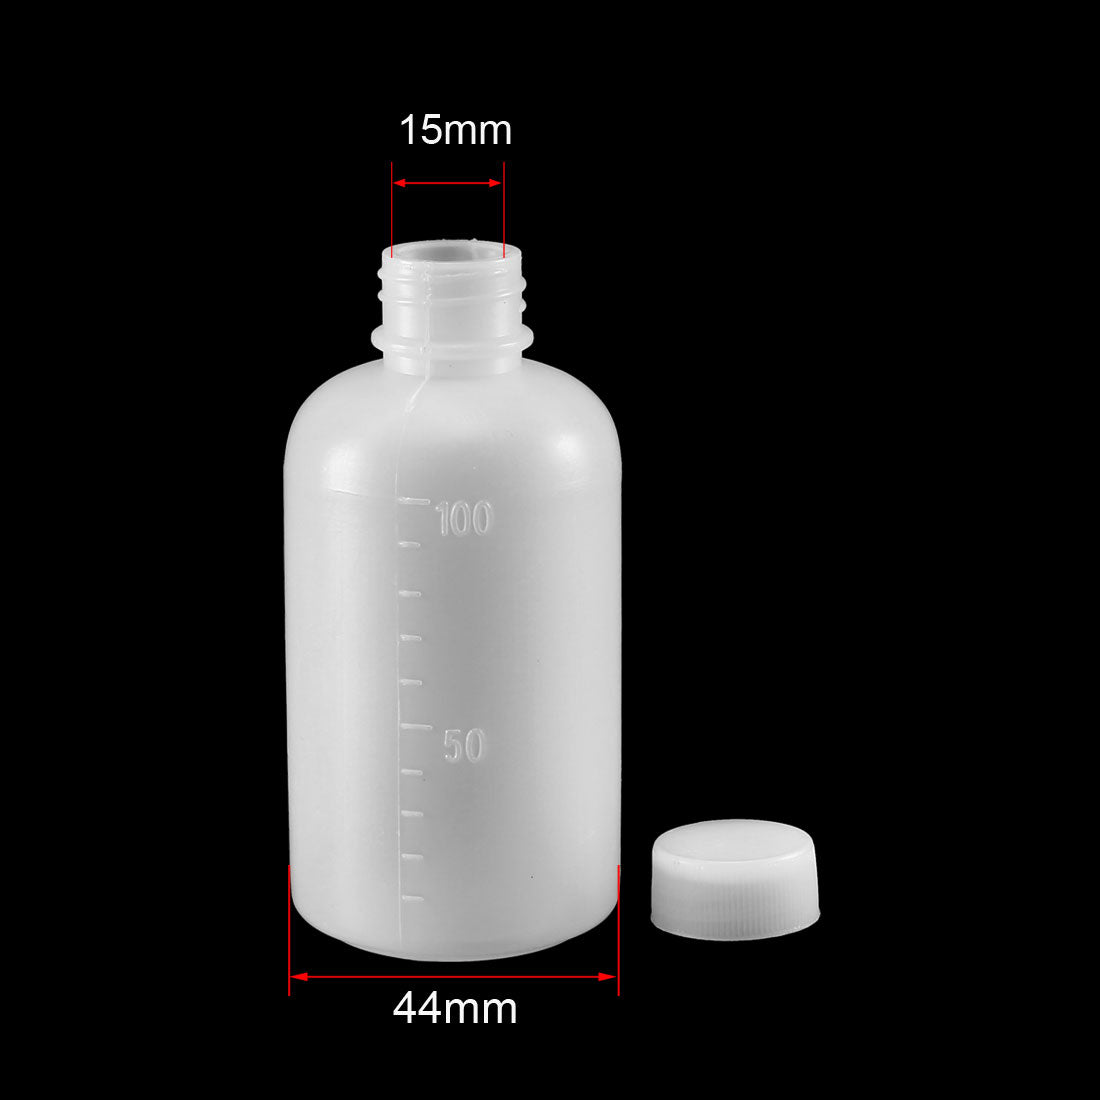 Uxcell Uxcell Plastic Lab Chemical Reagent Bottle 1000ml/33.8oz Small Mouth Sample Sealing Liquid Storage Container 2pcs